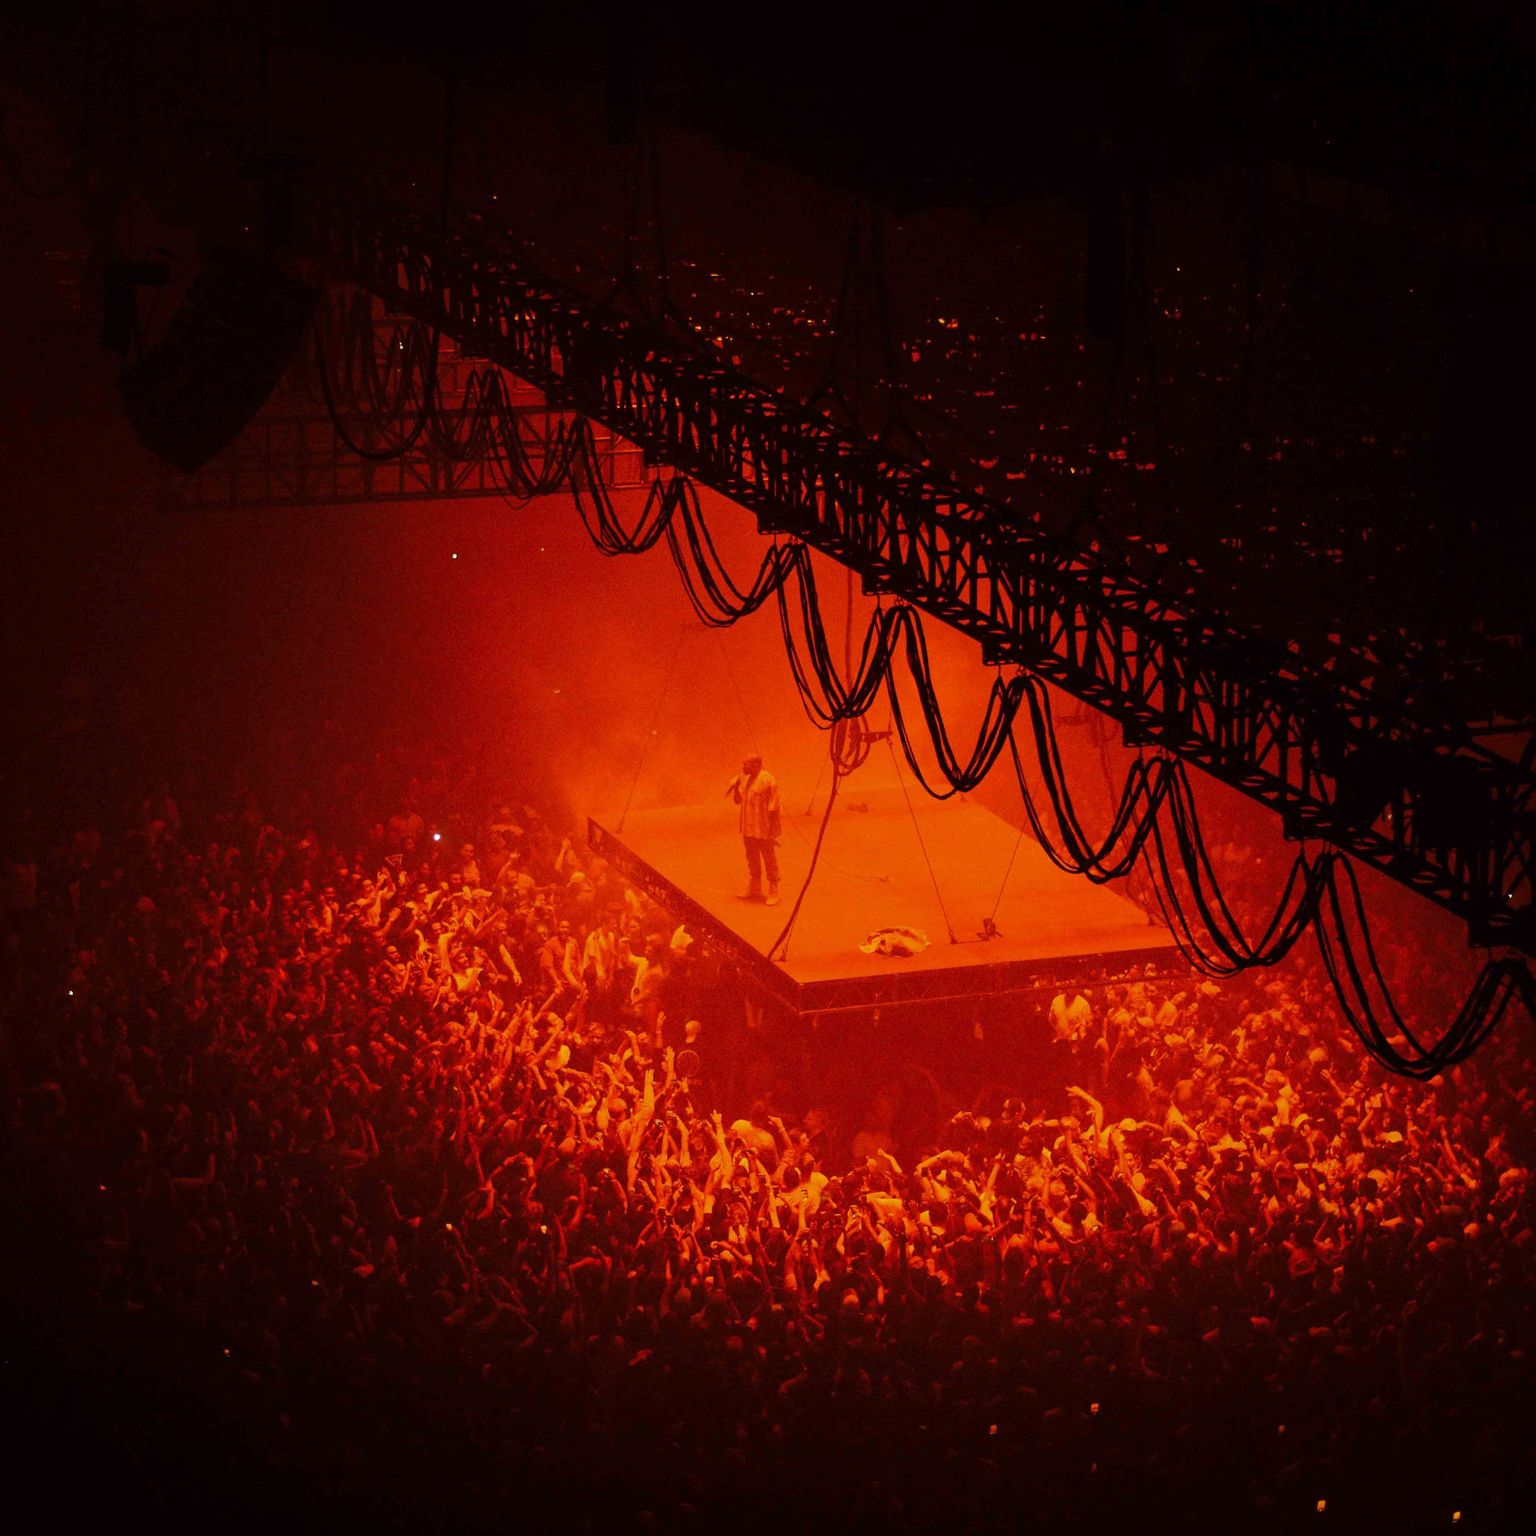 Kanye West performing on a suspended stage in-front of thousands of people.